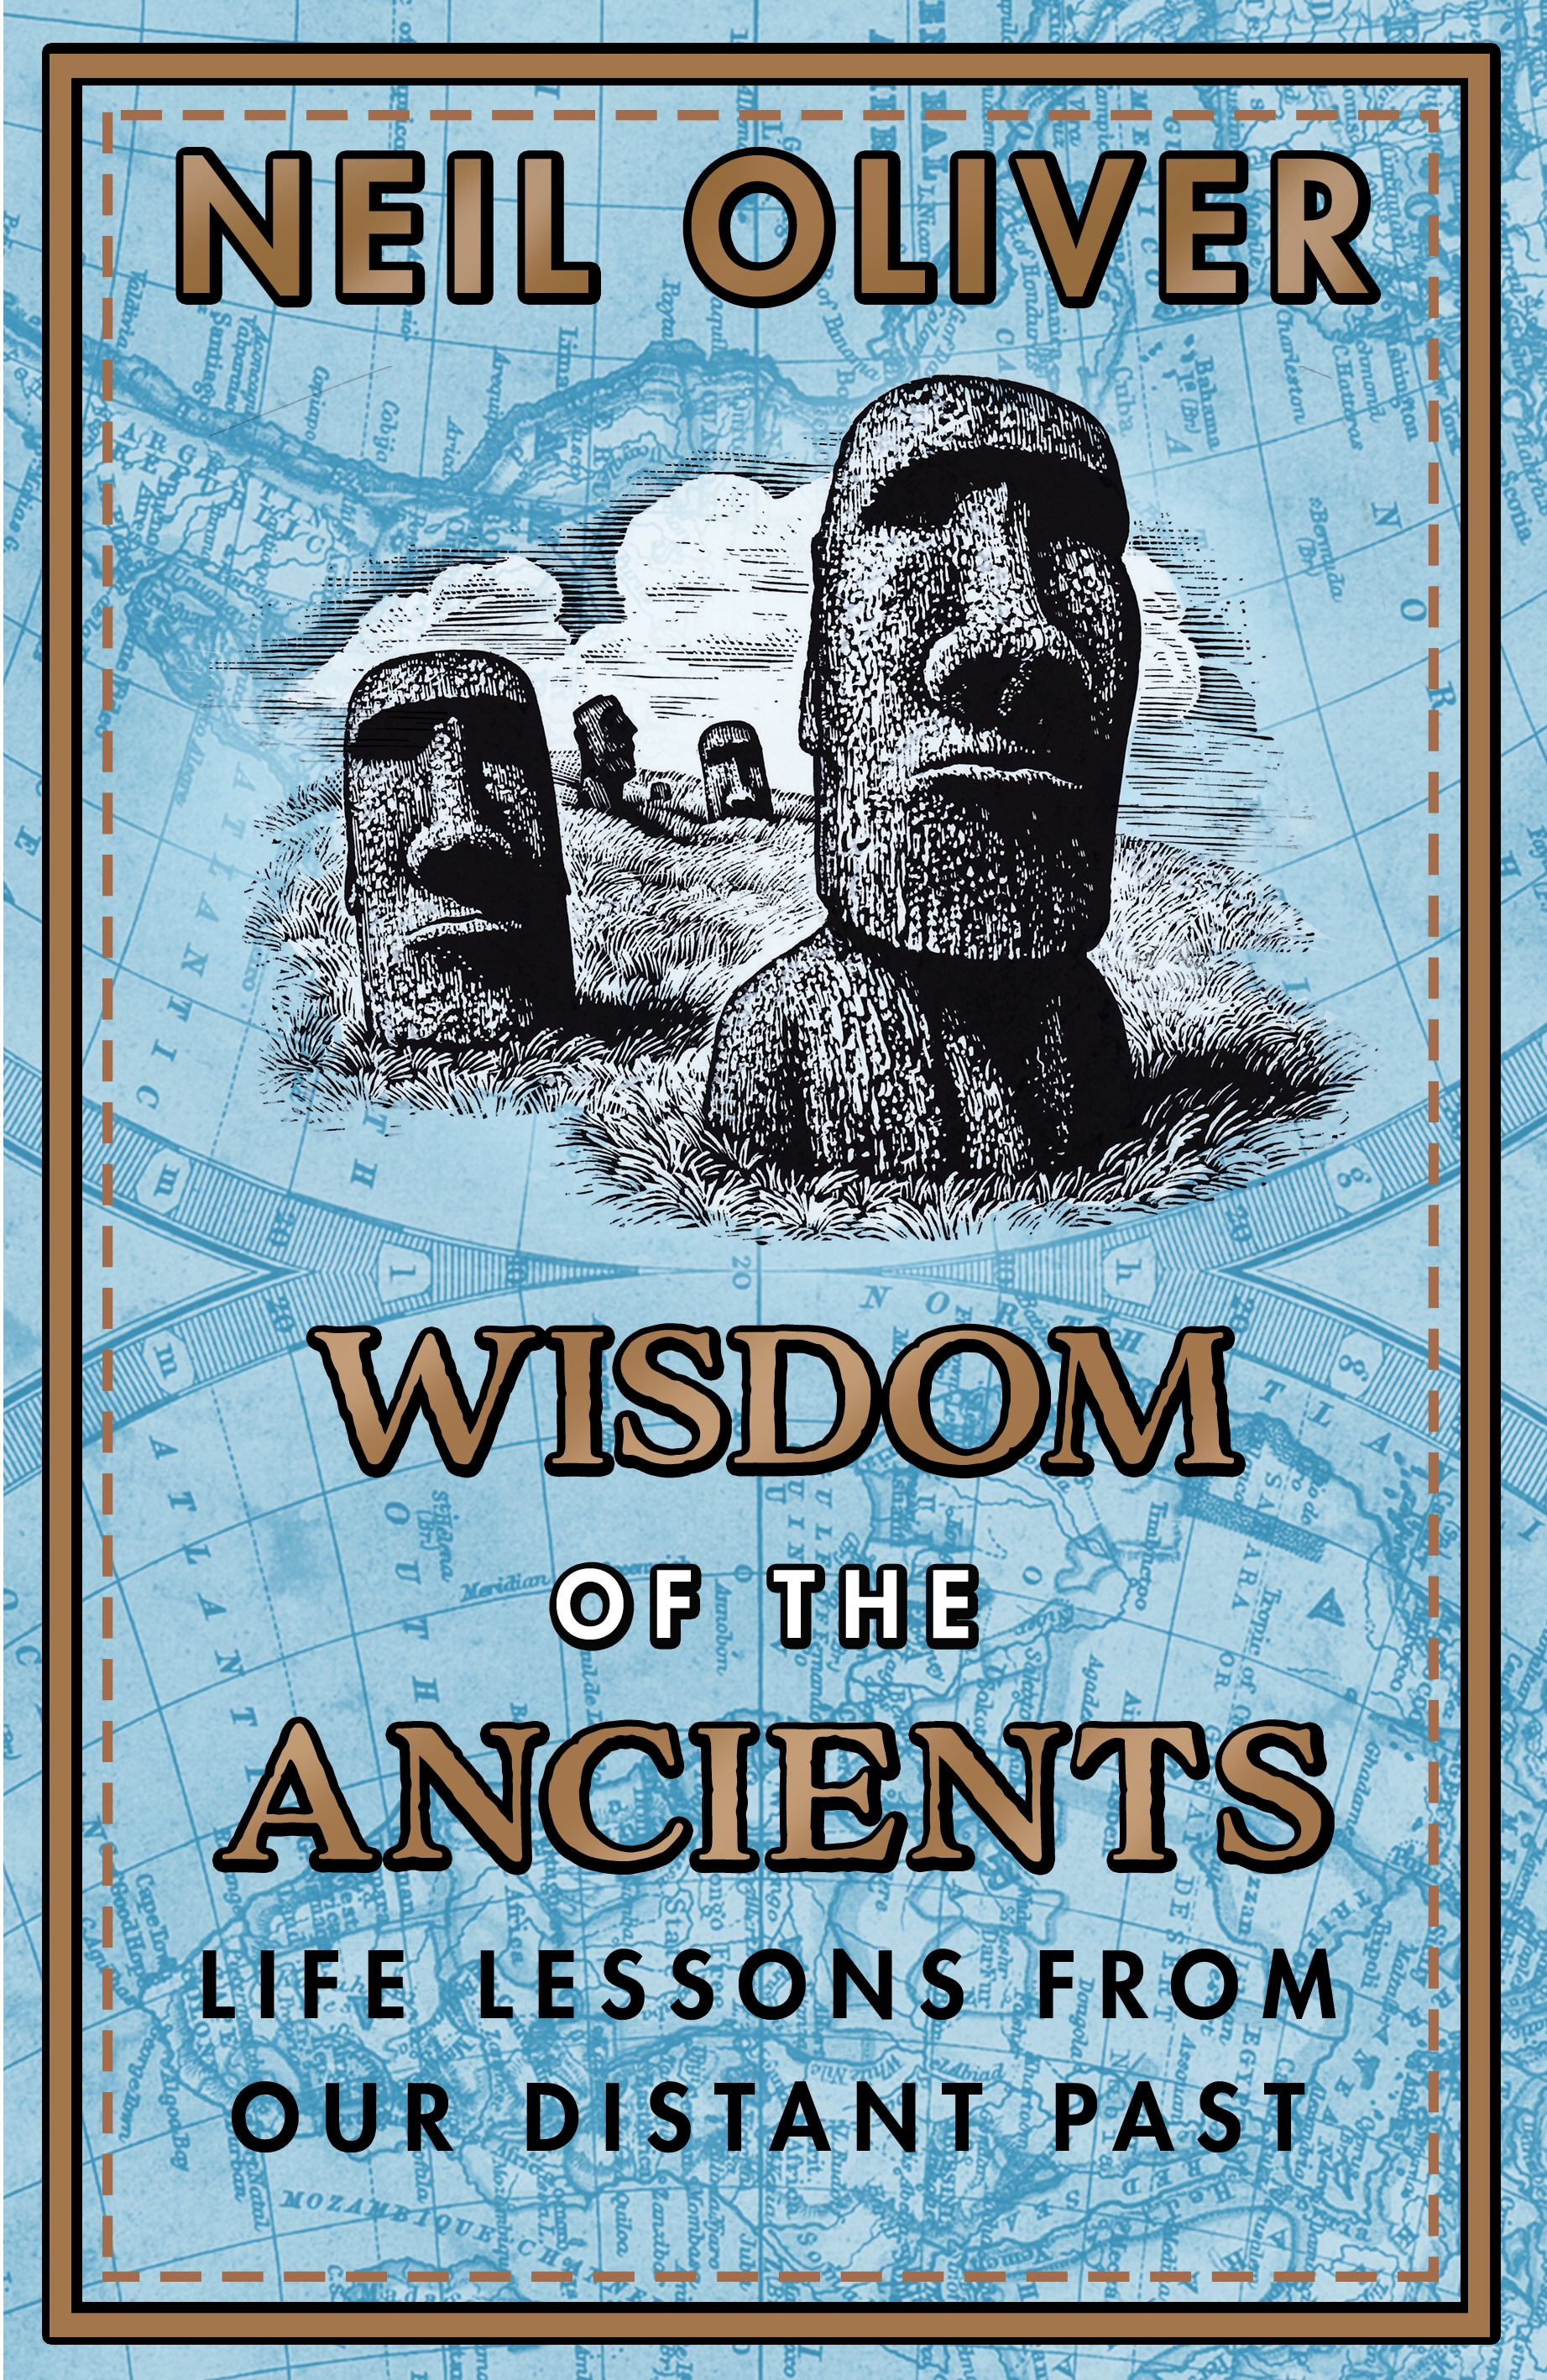 Book “Wisdom of the Ancients” by Neil Oliver — September 17, 2020